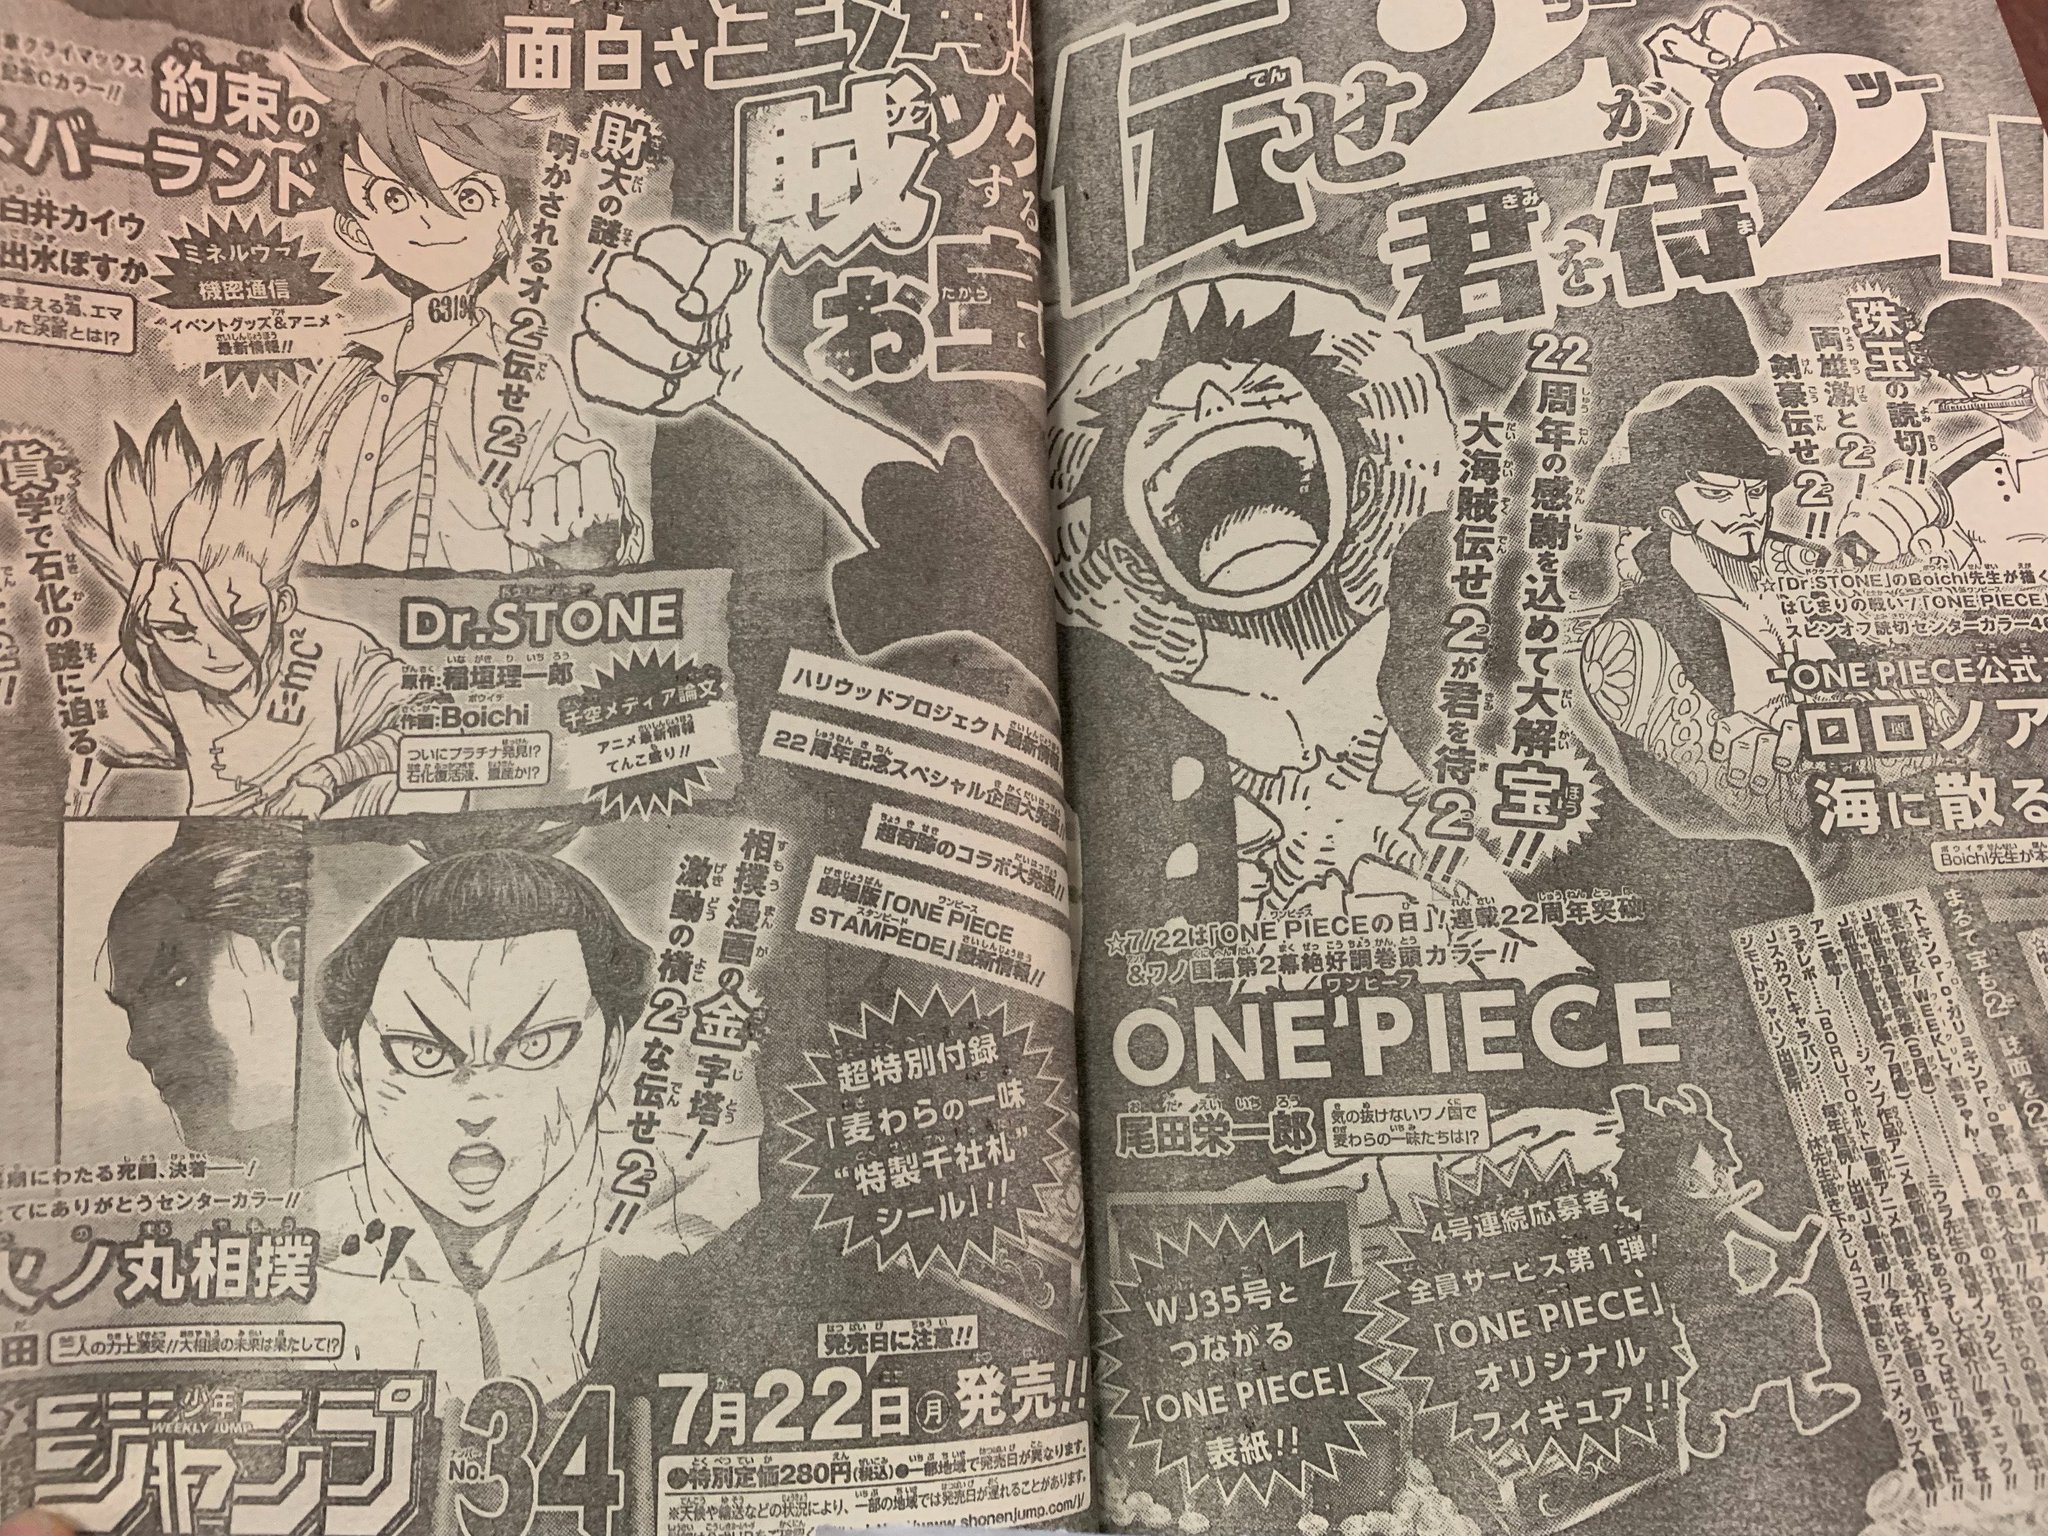 One Piece News Central Latest Snapshot Chan Rssing Com